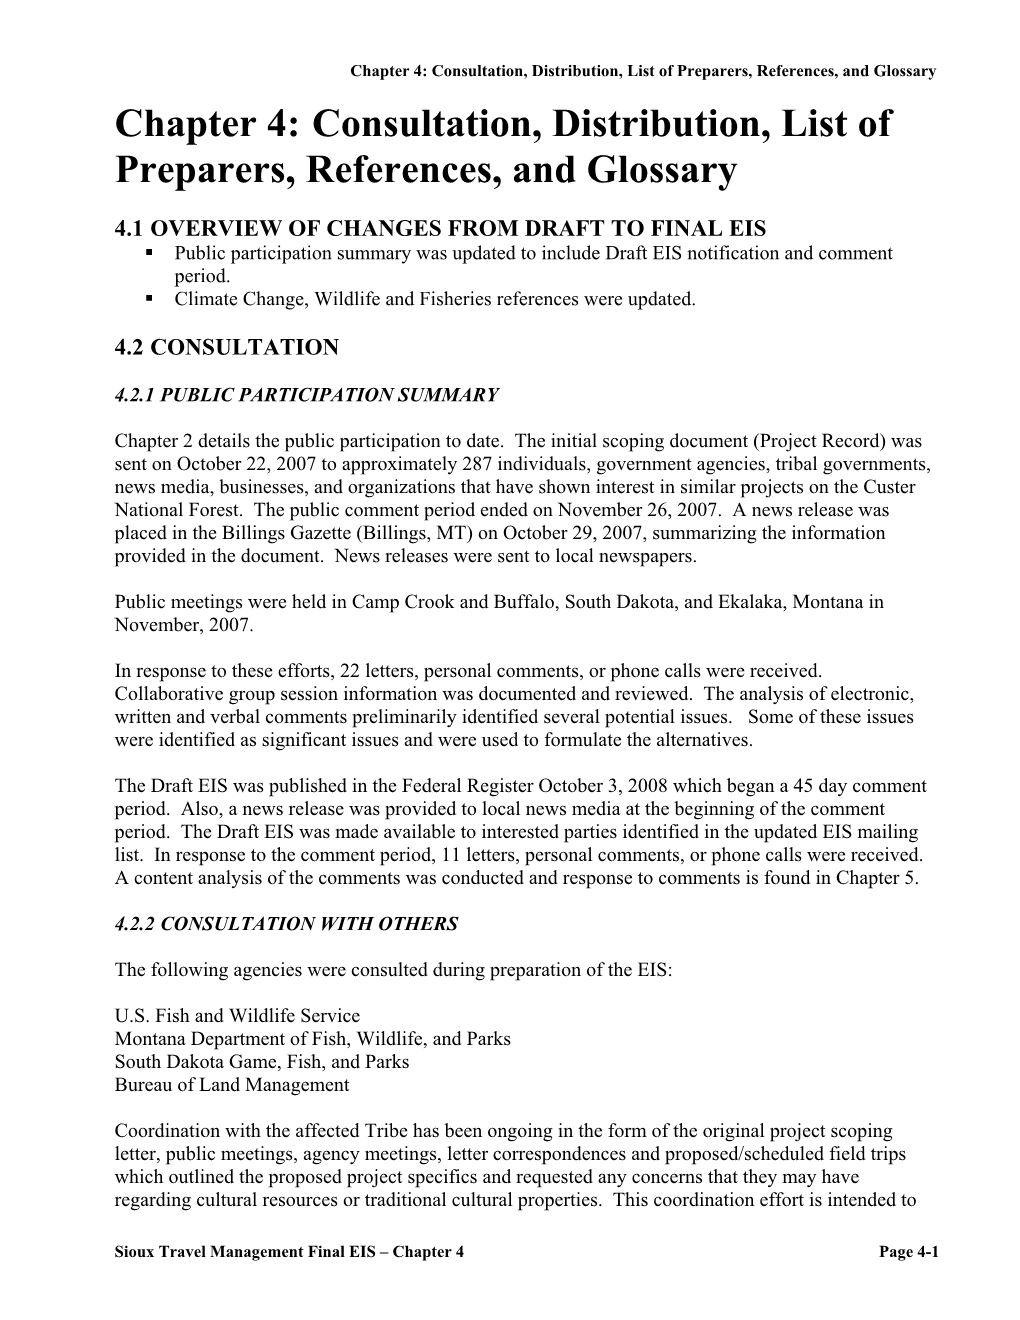 Chapter 4: Consultation, Distribution, List of Preparers, References, and Glossary